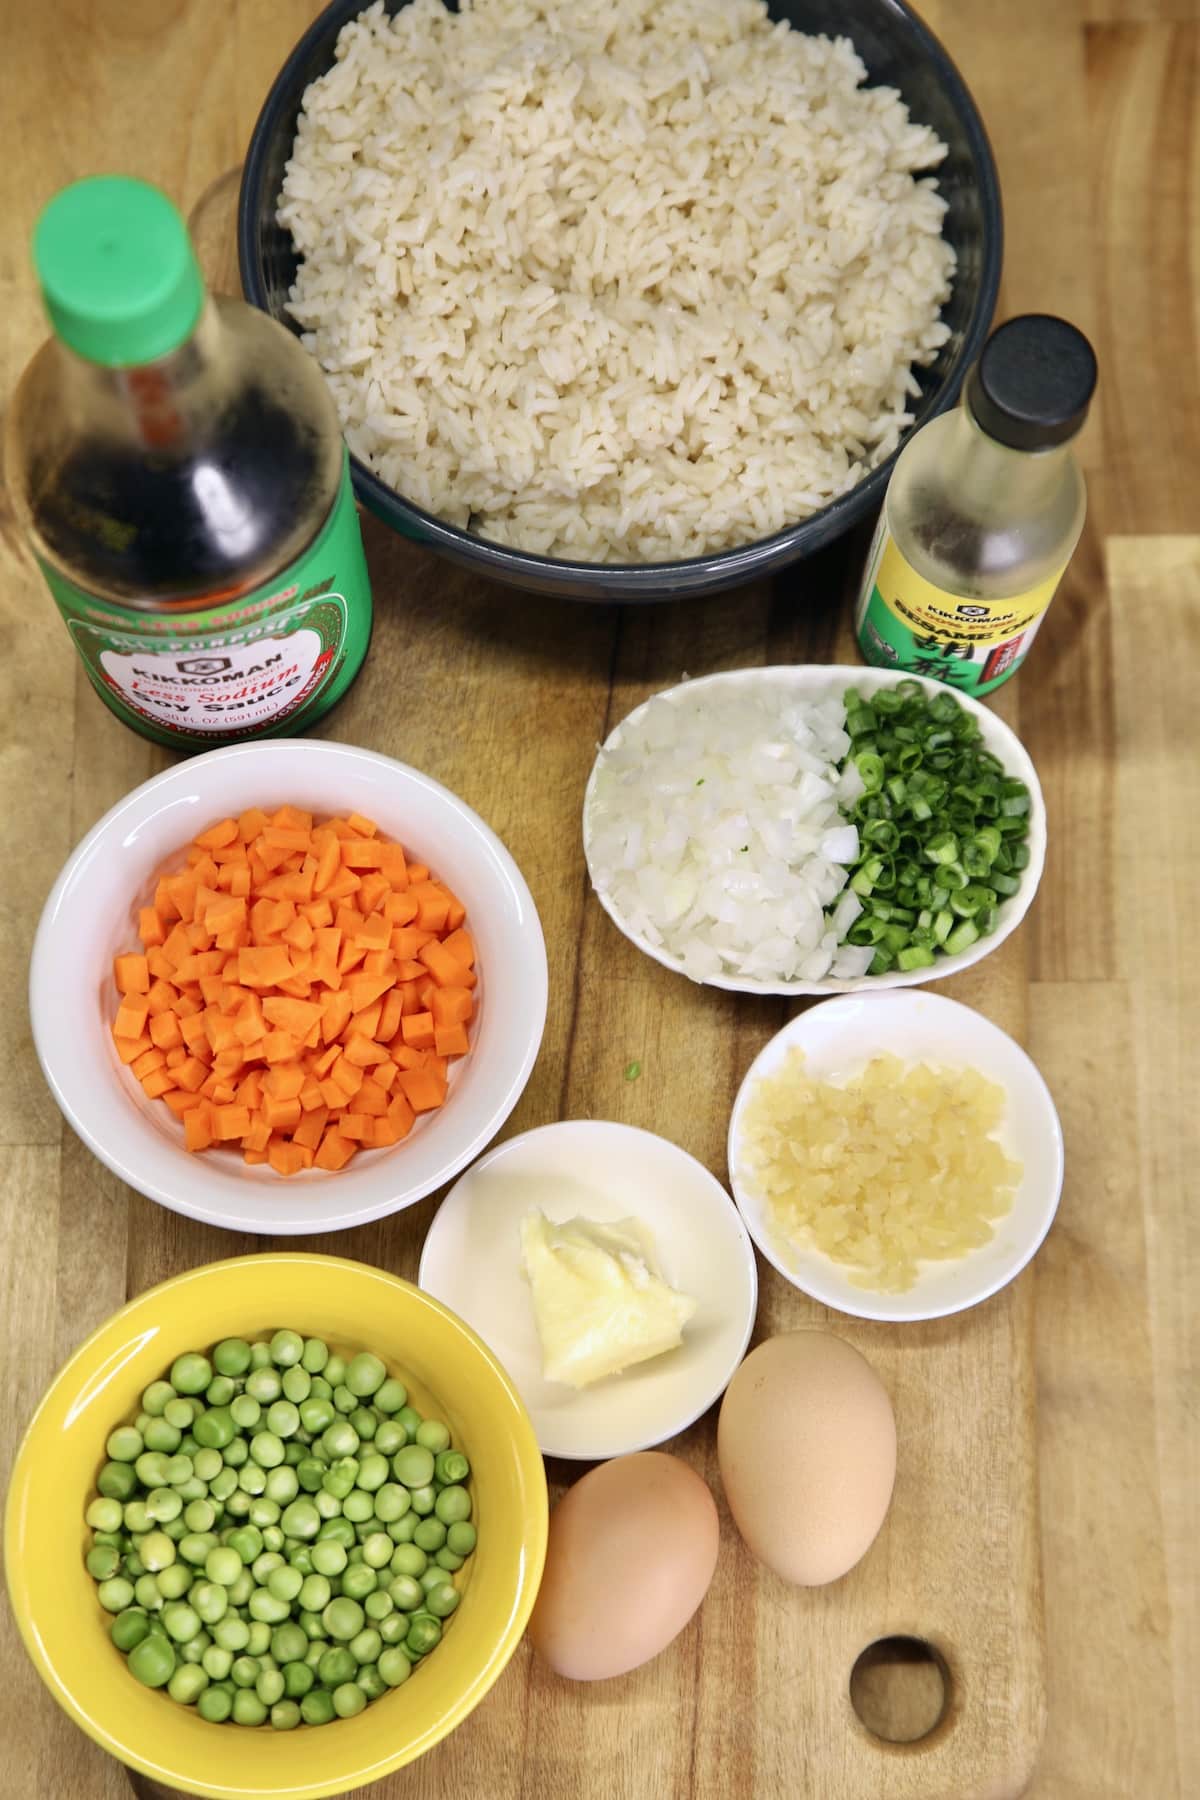 Ingredients for egg fried rice.